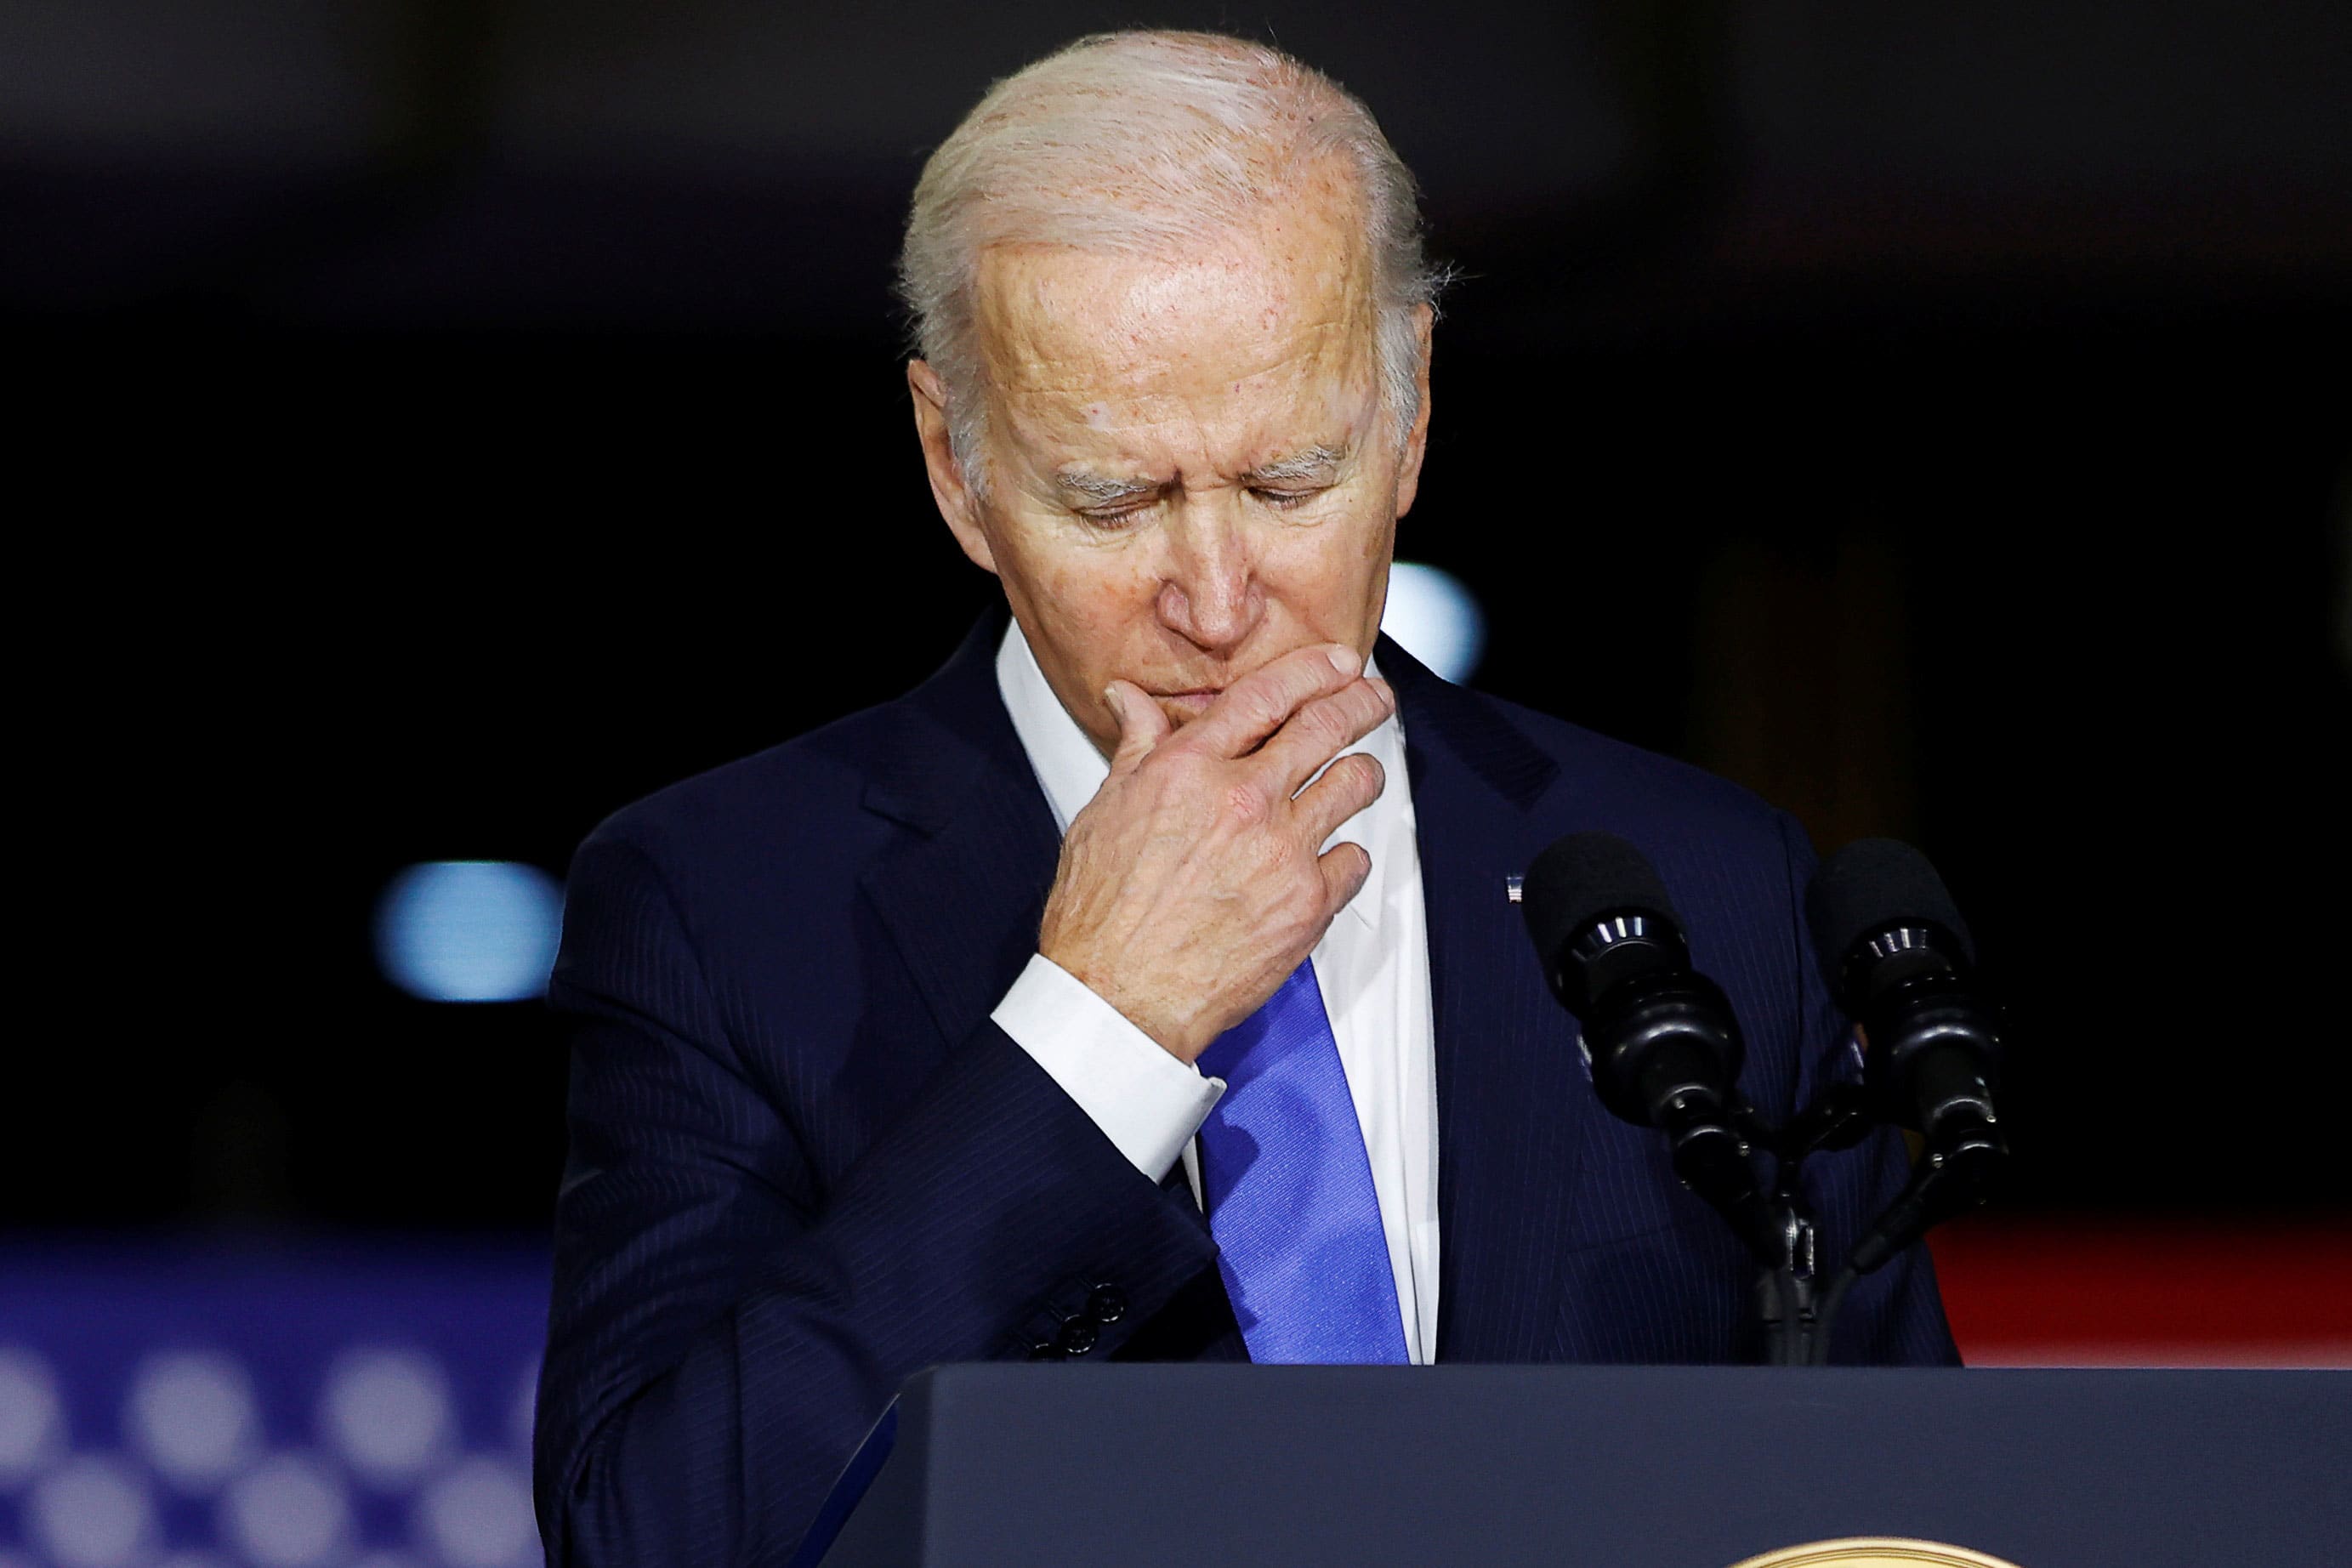 Public view on Biden's handling of Covid and the economy takes another hit, CNBC survey shows